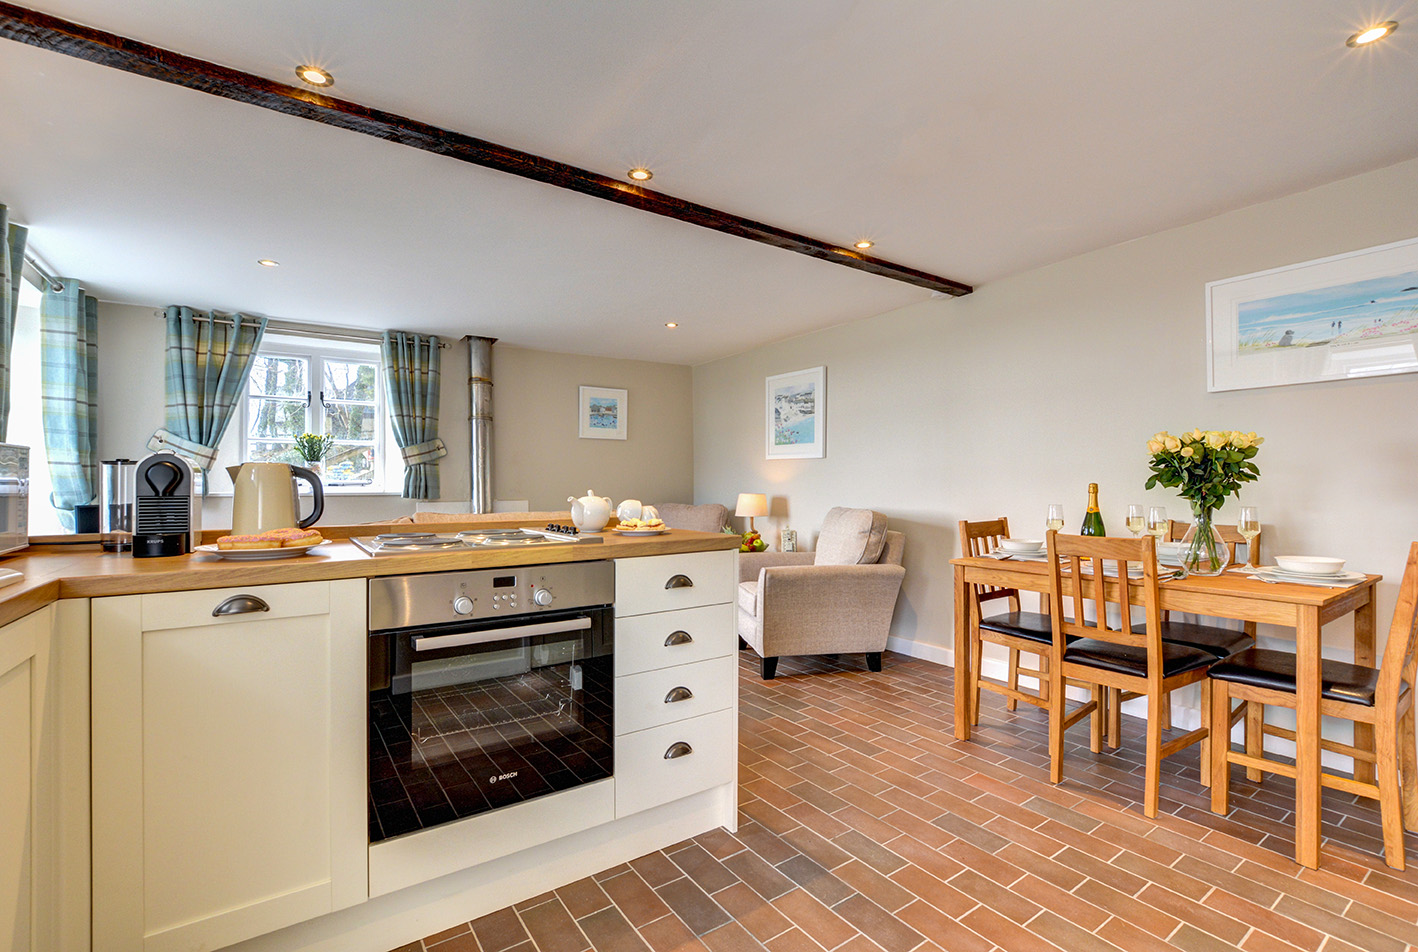 The dining area and kitchen of Butterwell luxury self catering converted barn holiday cottage at Penrose Burden in North Cornwall 02.jpg